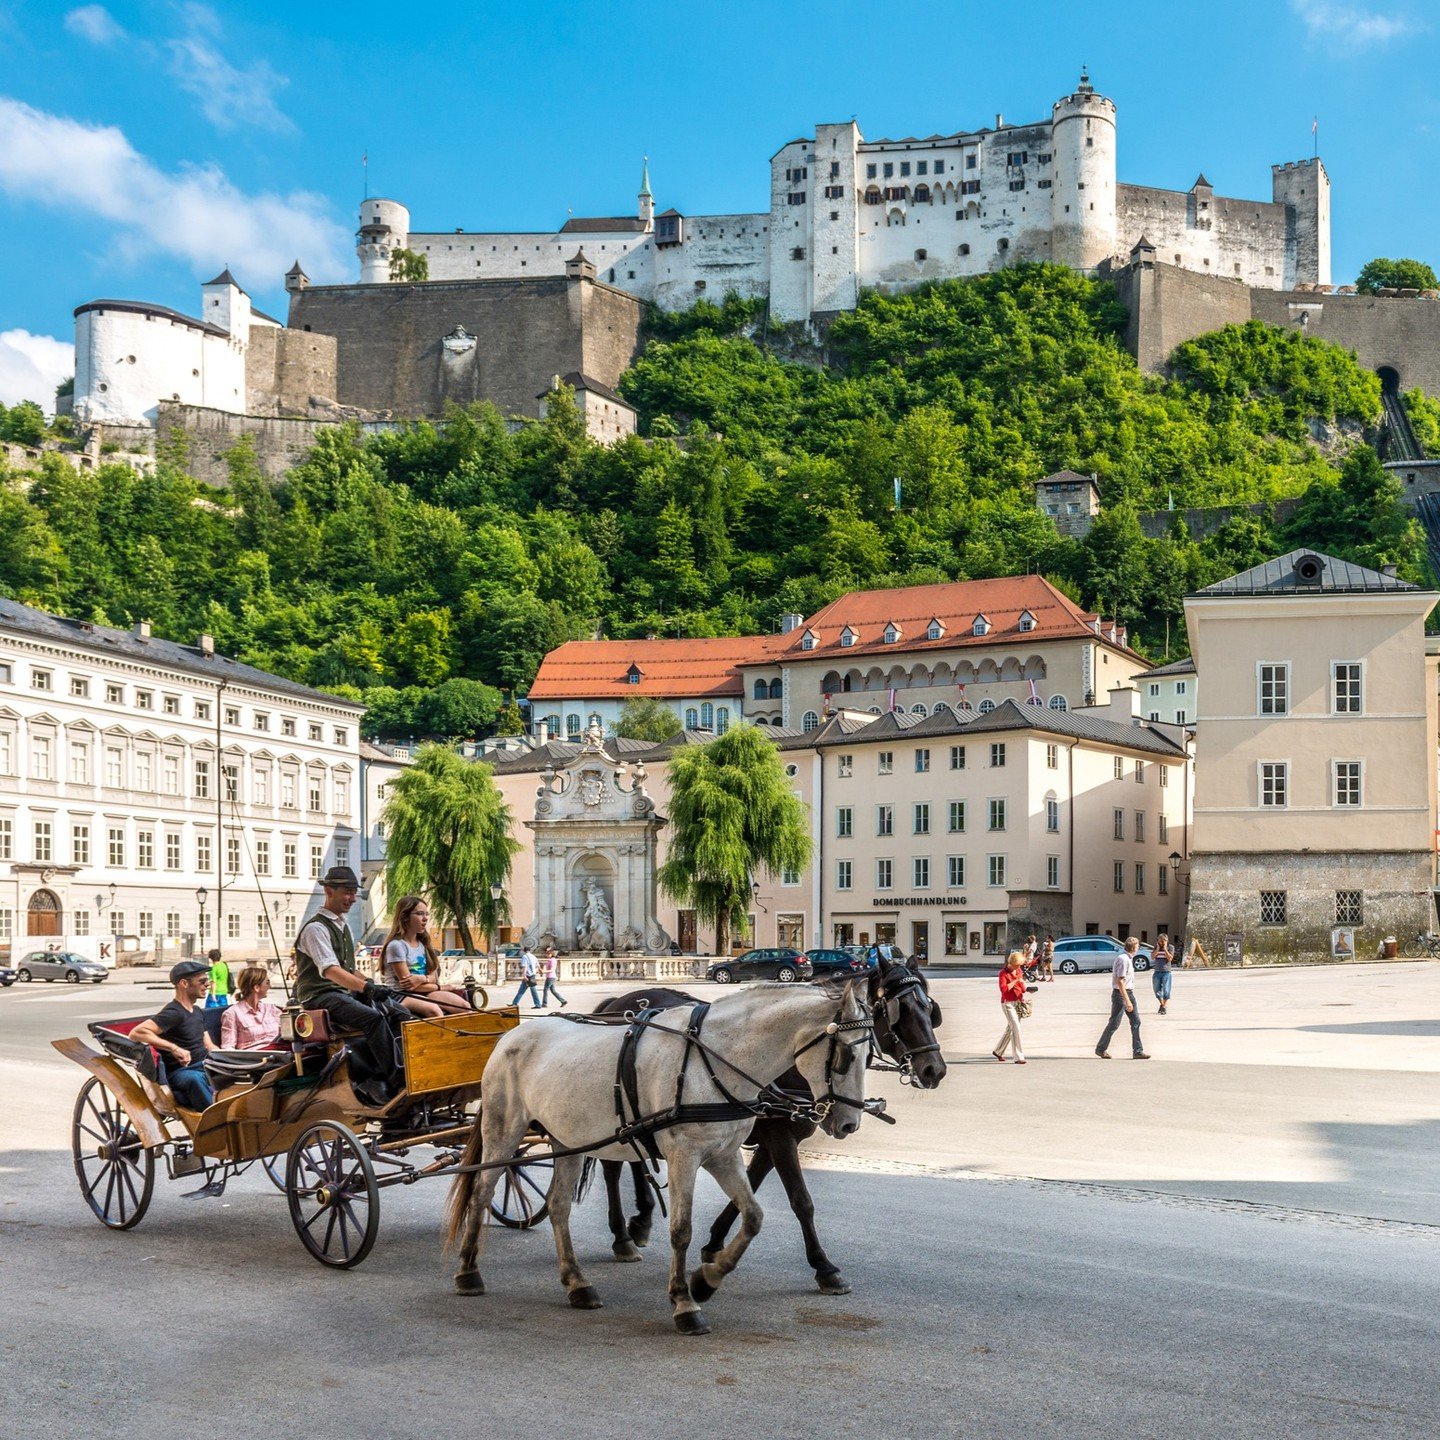  Picture of Fortress Hohensalzburg taken from the foot of the hill with a carriage in front © Tourismus Salzburg GmbH / Günter Breitegger 